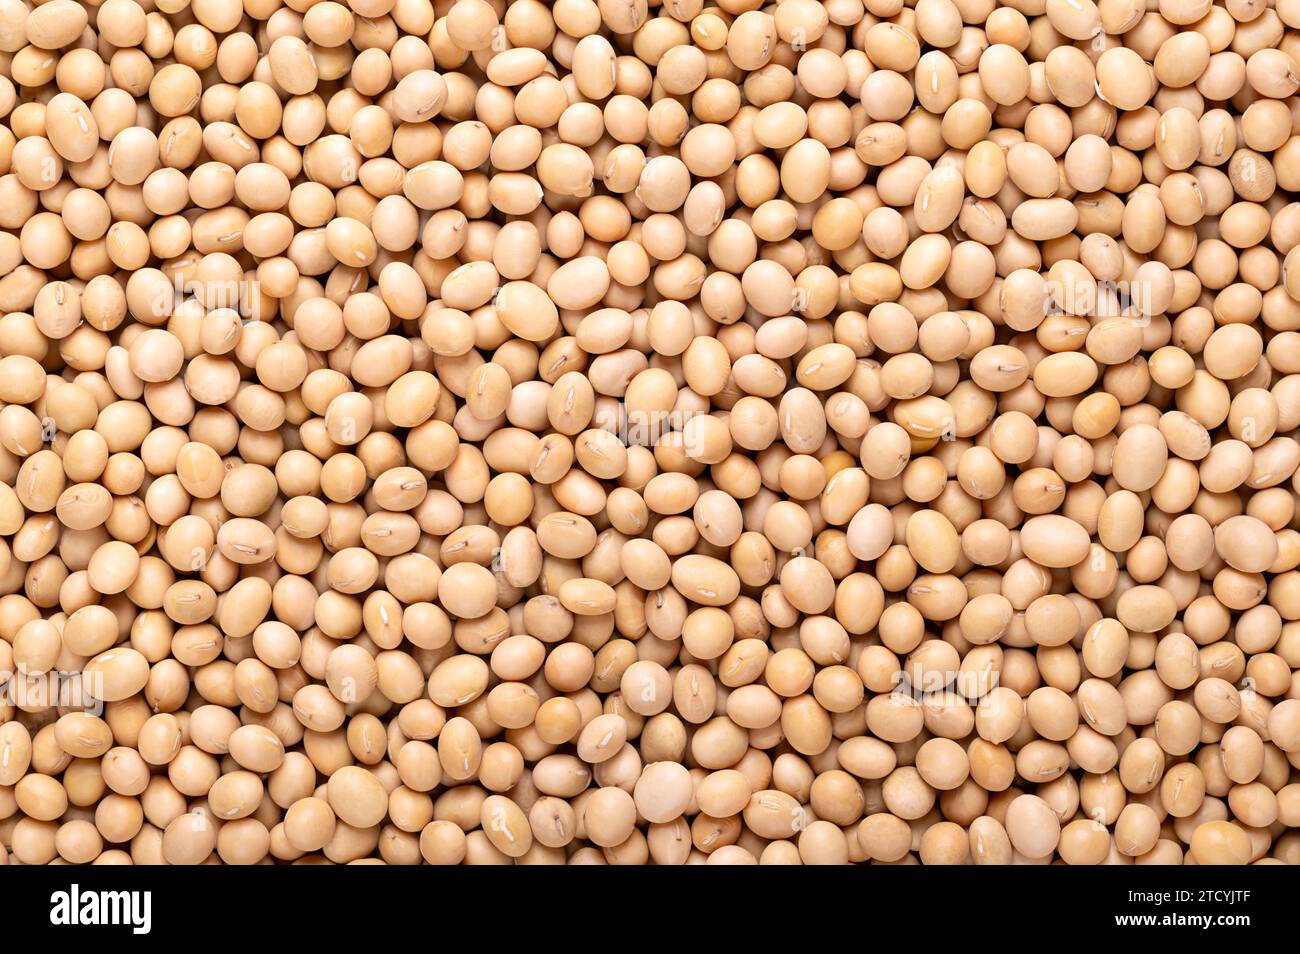 Dried soybeans, background, close-up, from above. Whole and raw seeds of the legume and oilseed Glycine max, also known as soy bean or soya bean. Stock Photo